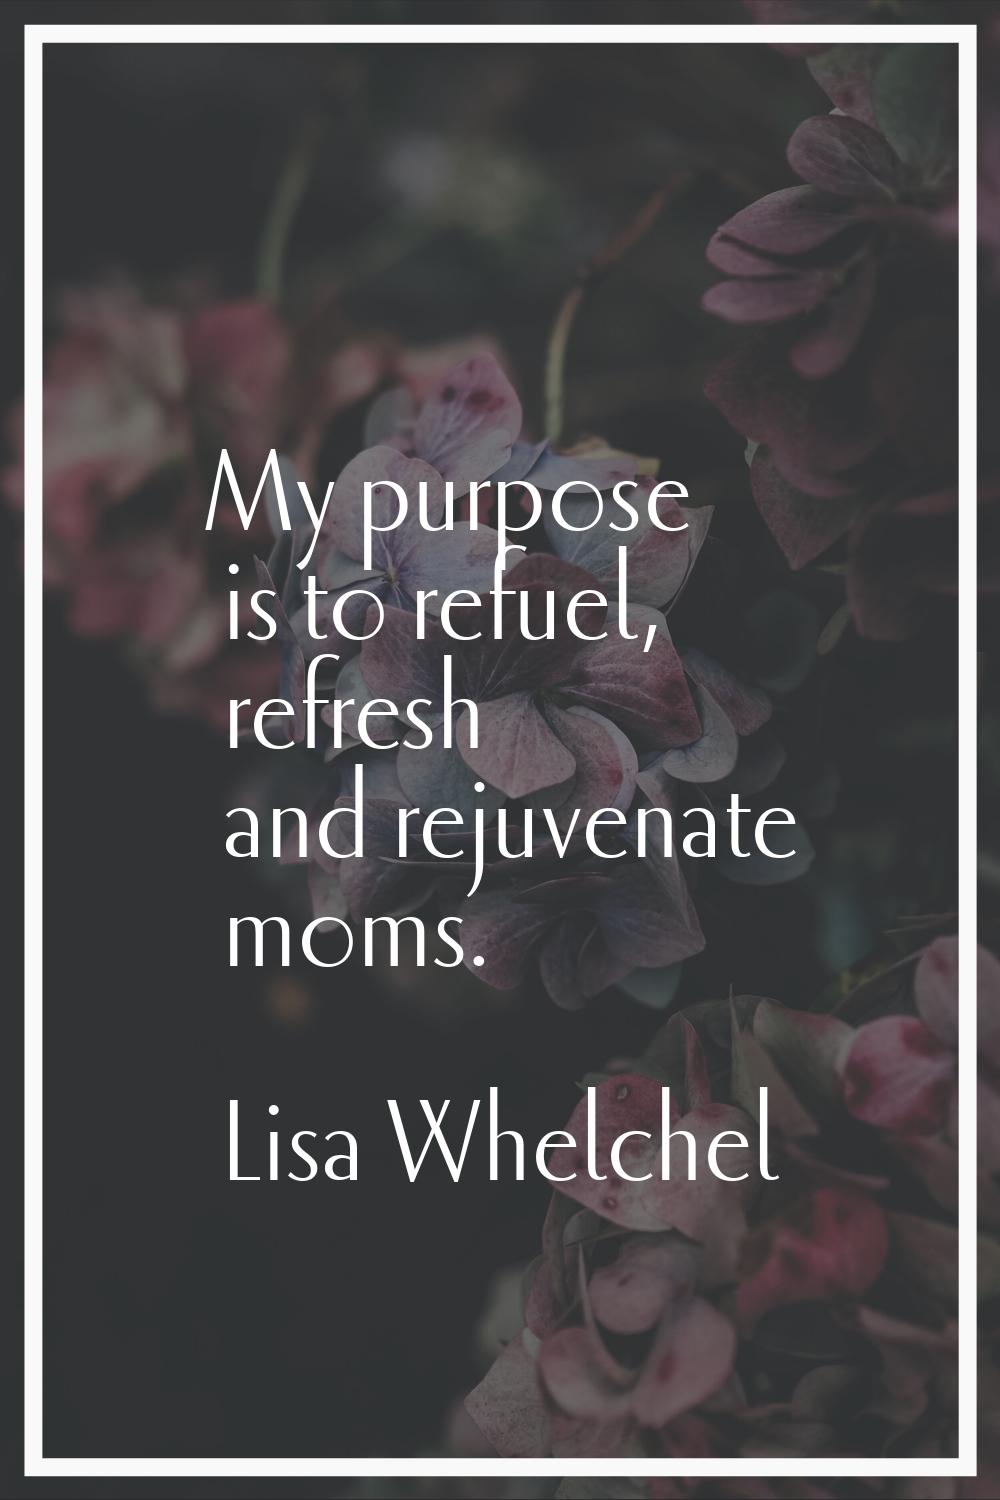 My purpose is to refuel, refresh and rejuvenate moms.